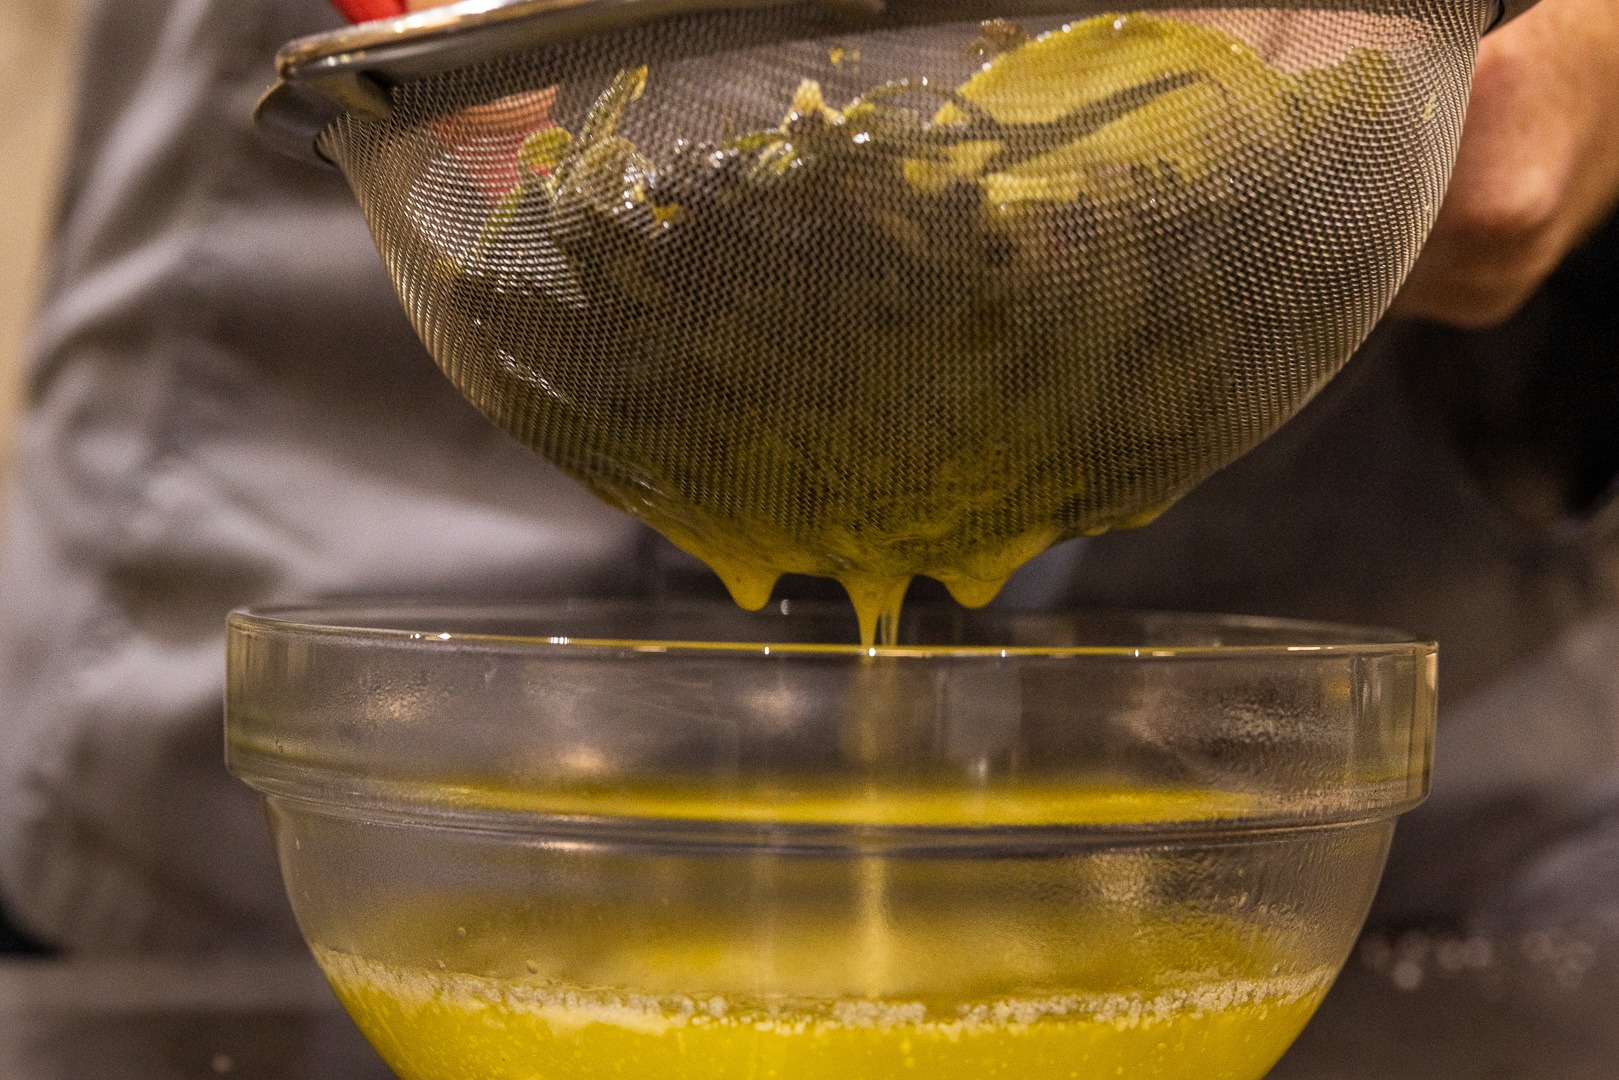 Straining the herbs from the butter